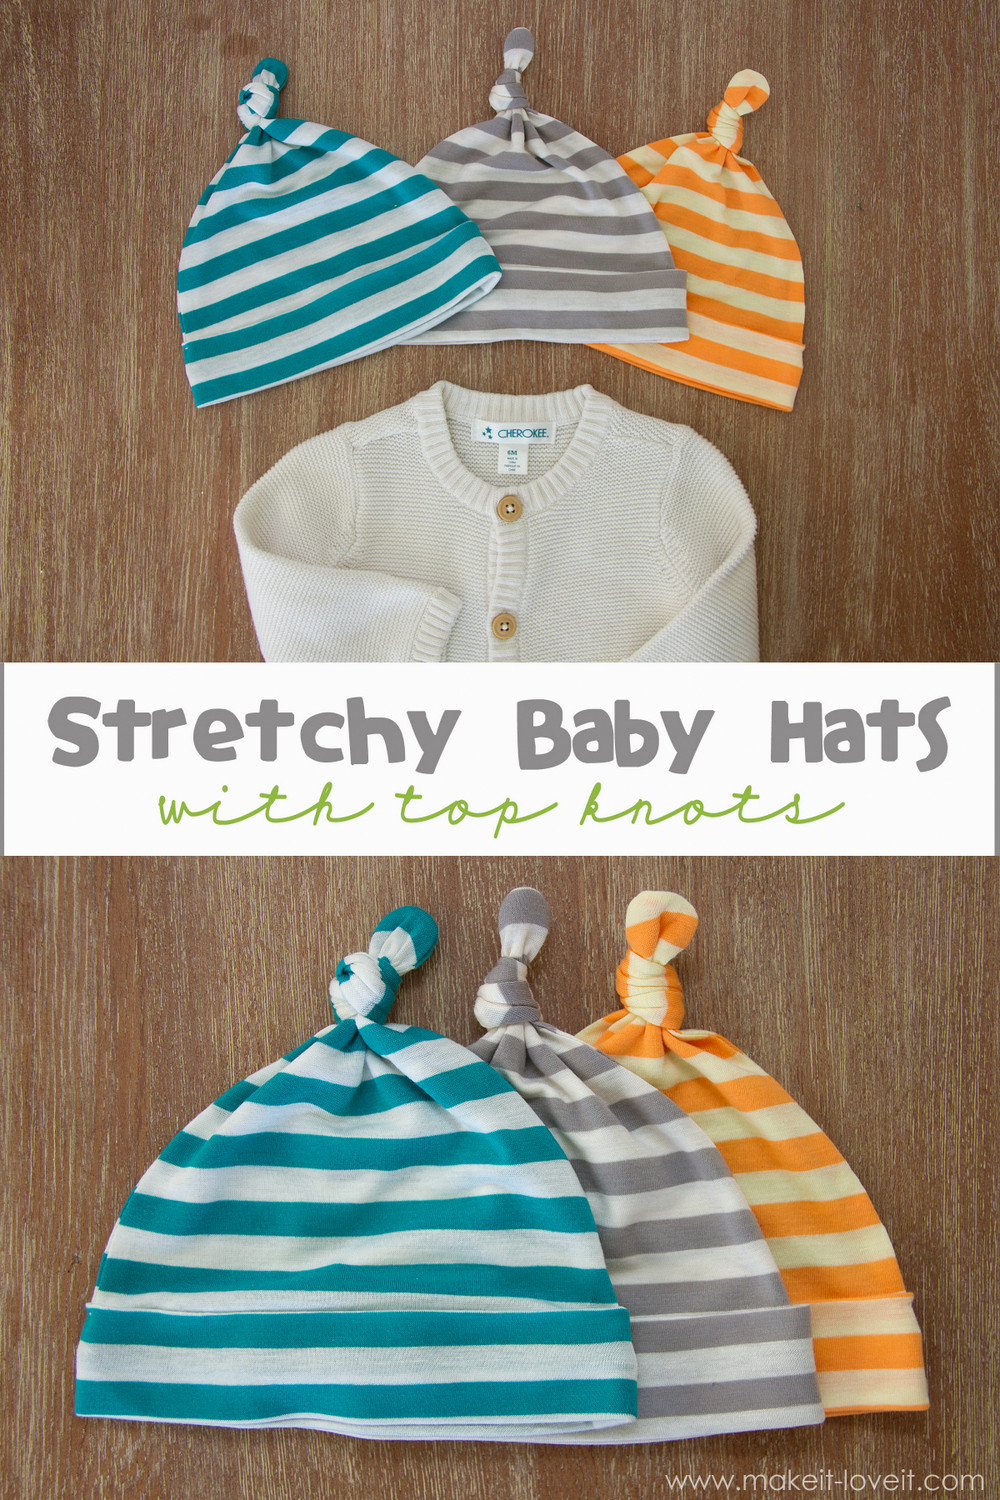 DIY Baby Hats
 BABY BEANIE PATTERNS How to Make & Sew With a Top Knot